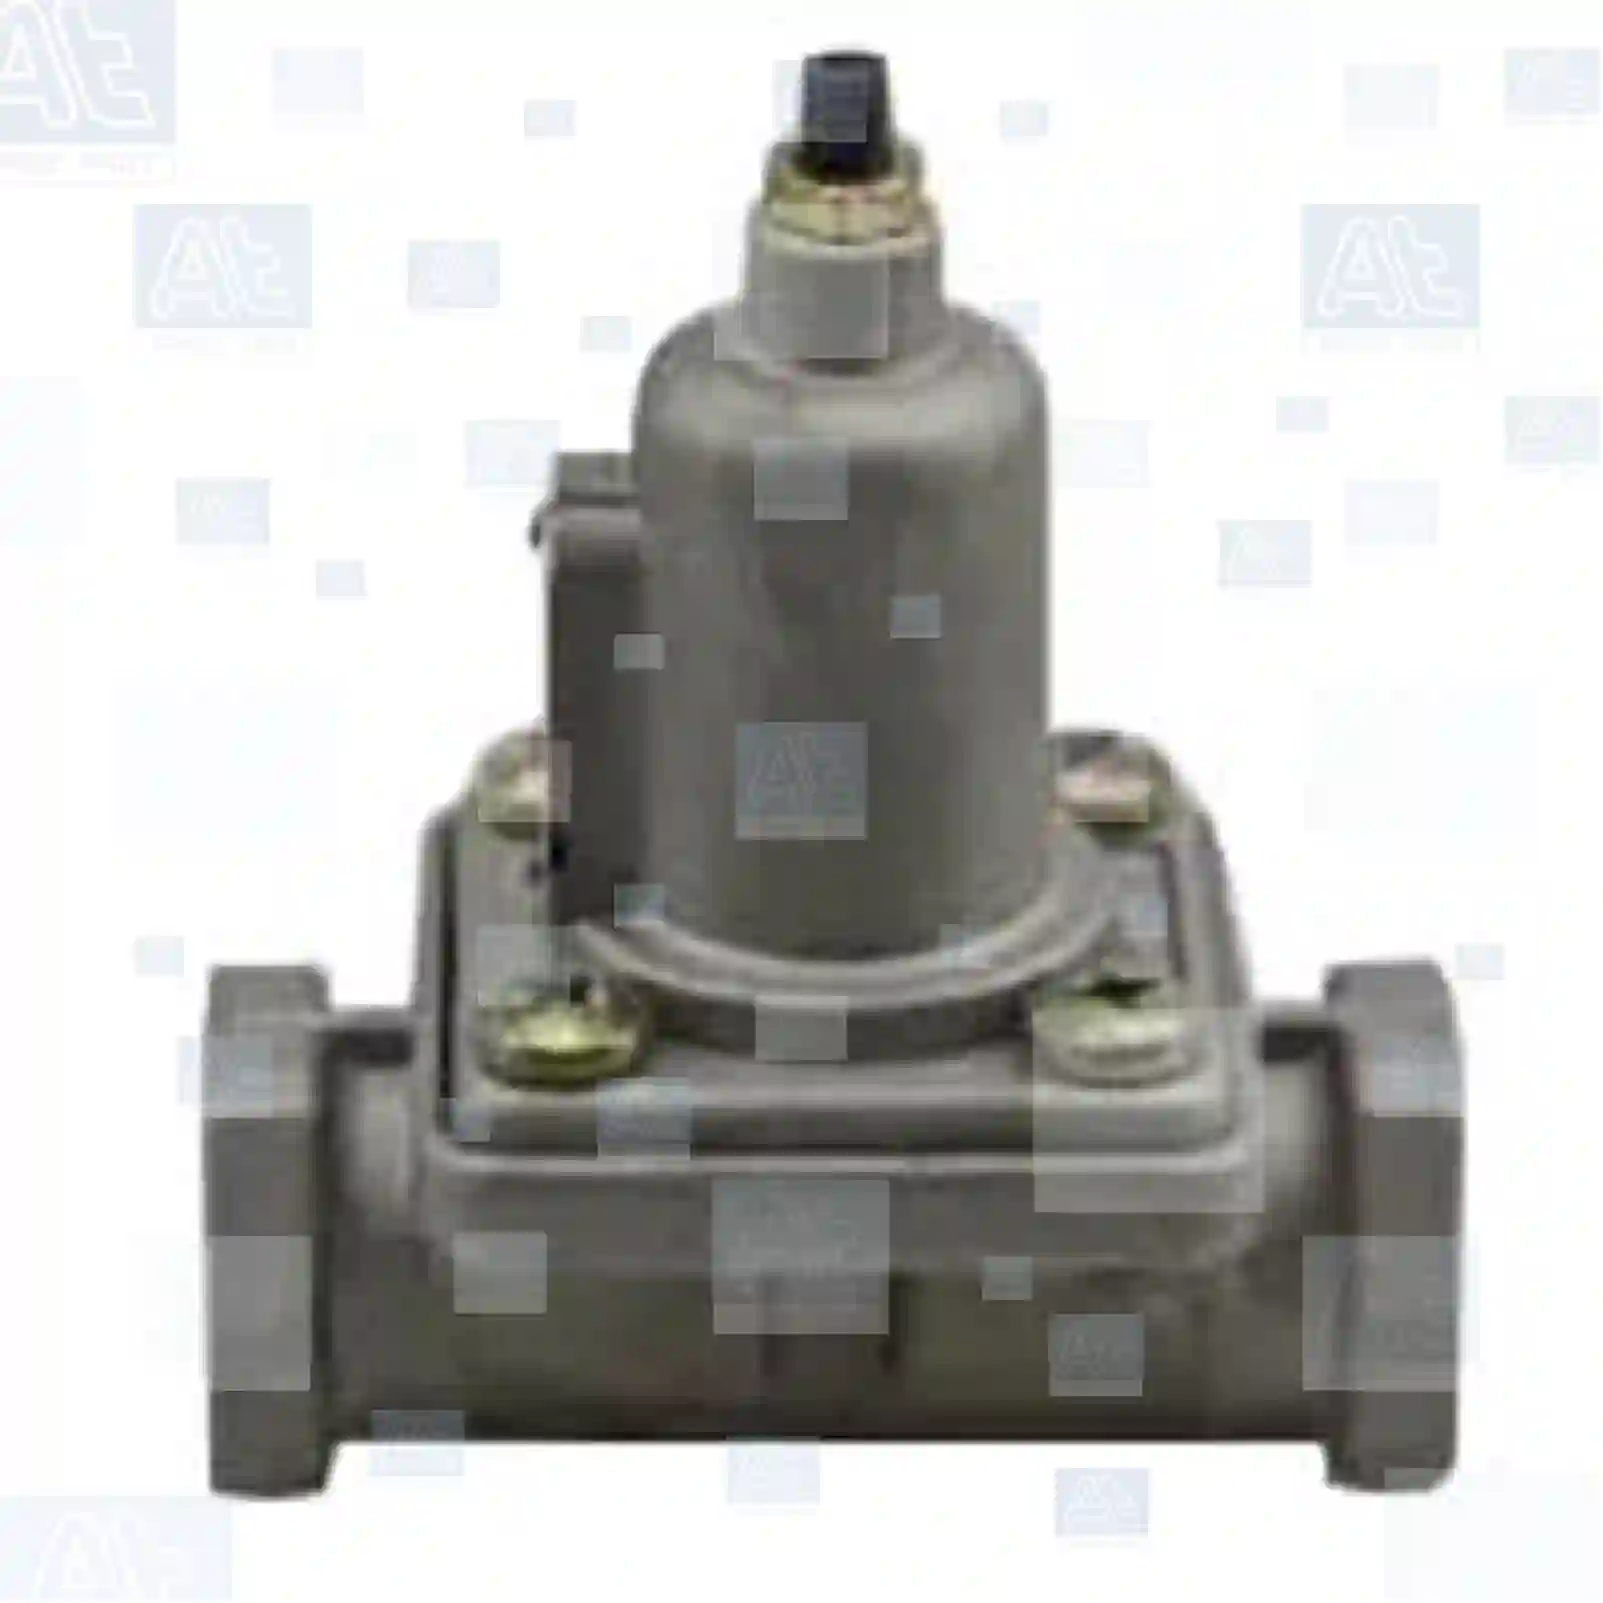 Overflow valve, at no 77714940, oem no: 122571003, 0110443, 0175890, 0179171, 0584333, 0644255, 0745081, 110443, 110443A, 110443R, 175890, 179171, 584333, 644255, 745081, A43178M10A02, 02516828, 03426283, 03429299, 42040890, 81521106013, 81521106041, 0004294744, 0004296244, 0004297544, 0004311606, 0014293544, 0014295144, 0014297544, 0034294744, 5000284127, 5021170108 At Spare Part | Engine, Accelerator Pedal, Camshaft, Connecting Rod, Crankcase, Crankshaft, Cylinder Head, Engine Suspension Mountings, Exhaust Manifold, Exhaust Gas Recirculation, Filter Kits, Flywheel Housing, General Overhaul Kits, Engine, Intake Manifold, Oil Cleaner, Oil Cooler, Oil Filter, Oil Pump, Oil Sump, Piston & Liner, Sensor & Switch, Timing Case, Turbocharger, Cooling System, Belt Tensioner, Coolant Filter, Coolant Pipe, Corrosion Prevention Agent, Drive, Expansion Tank, Fan, Intercooler, Monitors & Gauges, Radiator, Thermostat, V-Belt / Timing belt, Water Pump, Fuel System, Electronical Injector Unit, Feed Pump, Fuel Filter, cpl., Fuel Gauge Sender,  Fuel Line, Fuel Pump, Fuel Tank, Injection Line Kit, Injection Pump, Exhaust System, Clutch & Pedal, Gearbox, Propeller Shaft, Axles, Brake System, Hubs & Wheels, Suspension, Leaf Spring, Universal Parts / Accessories, Steering, Electrical System, Cabin Overflow valve, at no 77714940, oem no: 122571003, 0110443, 0175890, 0179171, 0584333, 0644255, 0745081, 110443, 110443A, 110443R, 175890, 179171, 584333, 644255, 745081, A43178M10A02, 02516828, 03426283, 03429299, 42040890, 81521106013, 81521106041, 0004294744, 0004296244, 0004297544, 0004311606, 0014293544, 0014295144, 0014297544, 0034294744, 5000284127, 5021170108 At Spare Part | Engine, Accelerator Pedal, Camshaft, Connecting Rod, Crankcase, Crankshaft, Cylinder Head, Engine Suspension Mountings, Exhaust Manifold, Exhaust Gas Recirculation, Filter Kits, Flywheel Housing, General Overhaul Kits, Engine, Intake Manifold, Oil Cleaner, Oil Cooler, Oil Filter, Oil Pump, Oil Sump, Piston & Liner, Sensor & Switch, Timing Case, Turbocharger, Cooling System, Belt Tensioner, Coolant Filter, Coolant Pipe, Corrosion Prevention Agent, Drive, Expansion Tank, Fan, Intercooler, Monitors & Gauges, Radiator, Thermostat, V-Belt / Timing belt, Water Pump, Fuel System, Electronical Injector Unit, Feed Pump, Fuel Filter, cpl., Fuel Gauge Sender,  Fuel Line, Fuel Pump, Fuel Tank, Injection Line Kit, Injection Pump, Exhaust System, Clutch & Pedal, Gearbox, Propeller Shaft, Axles, Brake System, Hubs & Wheels, Suspension, Leaf Spring, Universal Parts / Accessories, Steering, Electrical System, Cabin